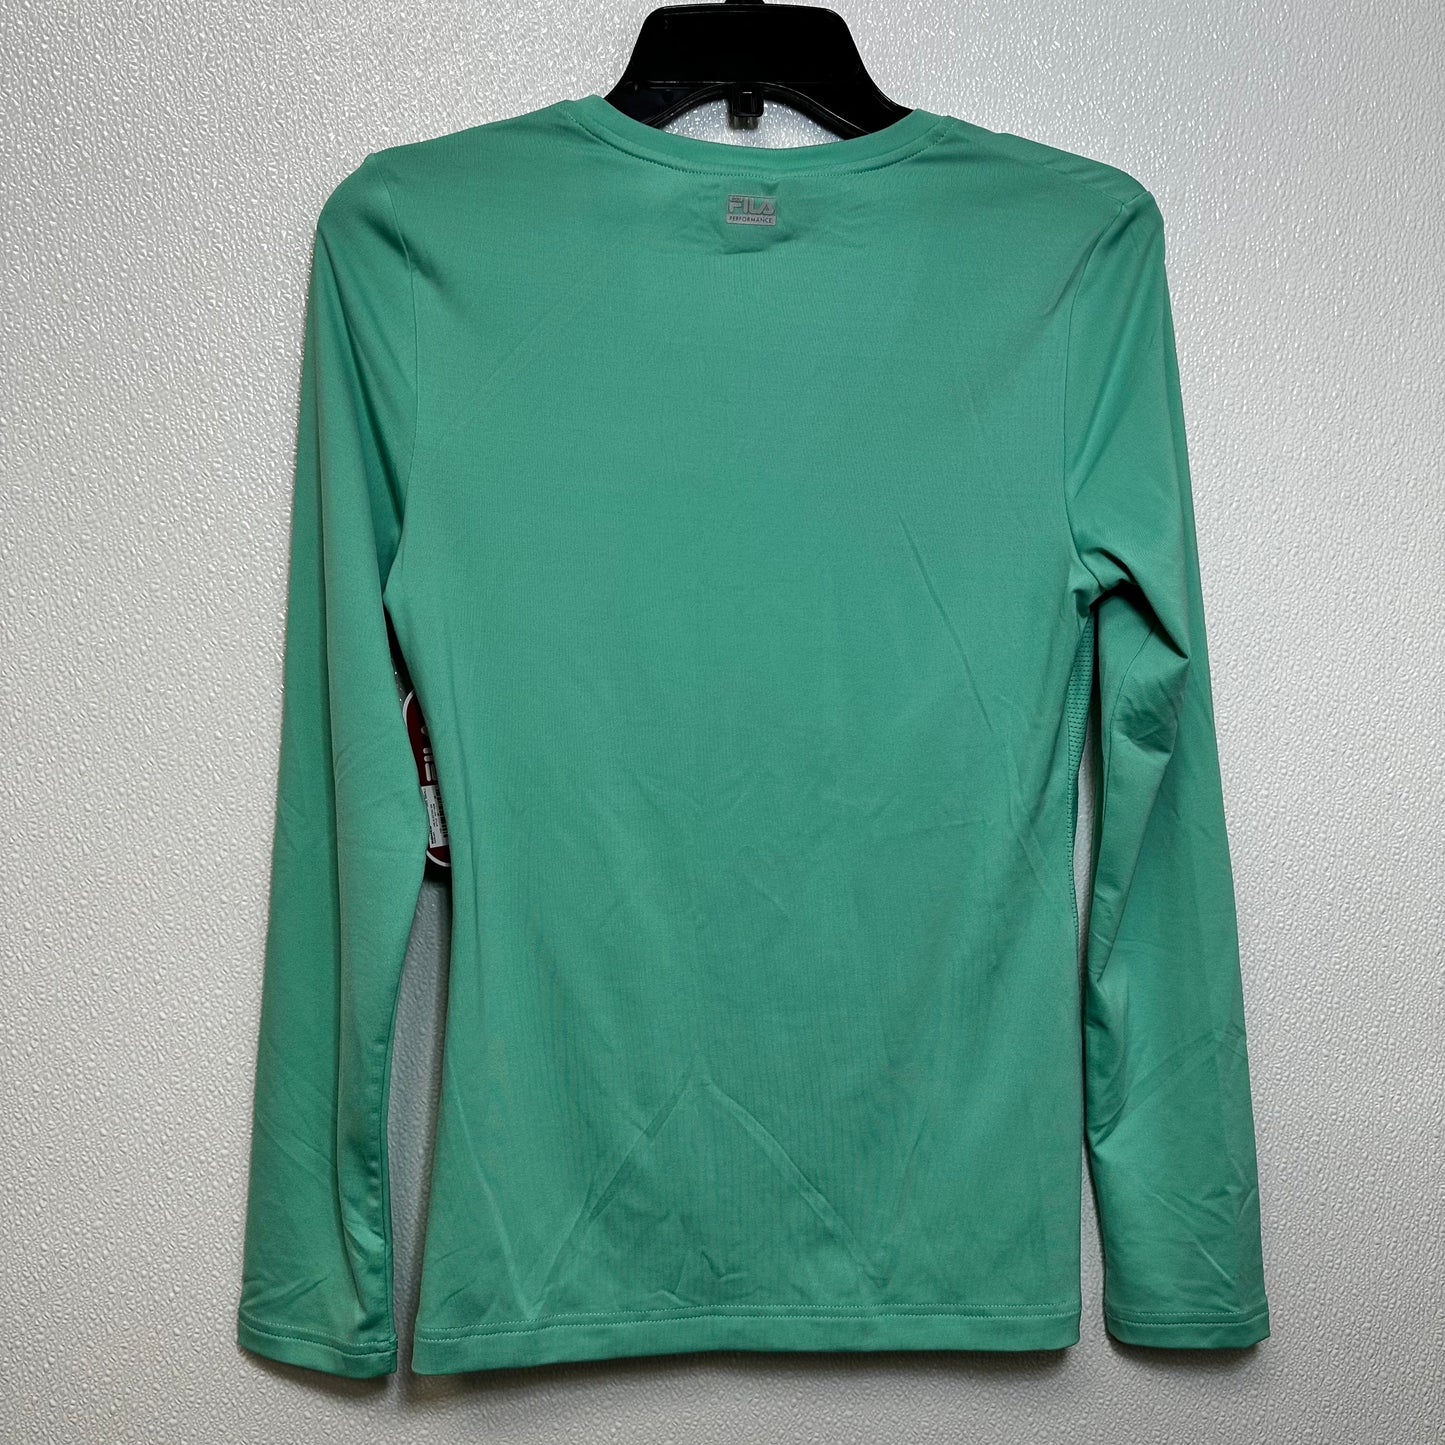 Green Athletic Top Long Sleeve Collar Fila, Size S